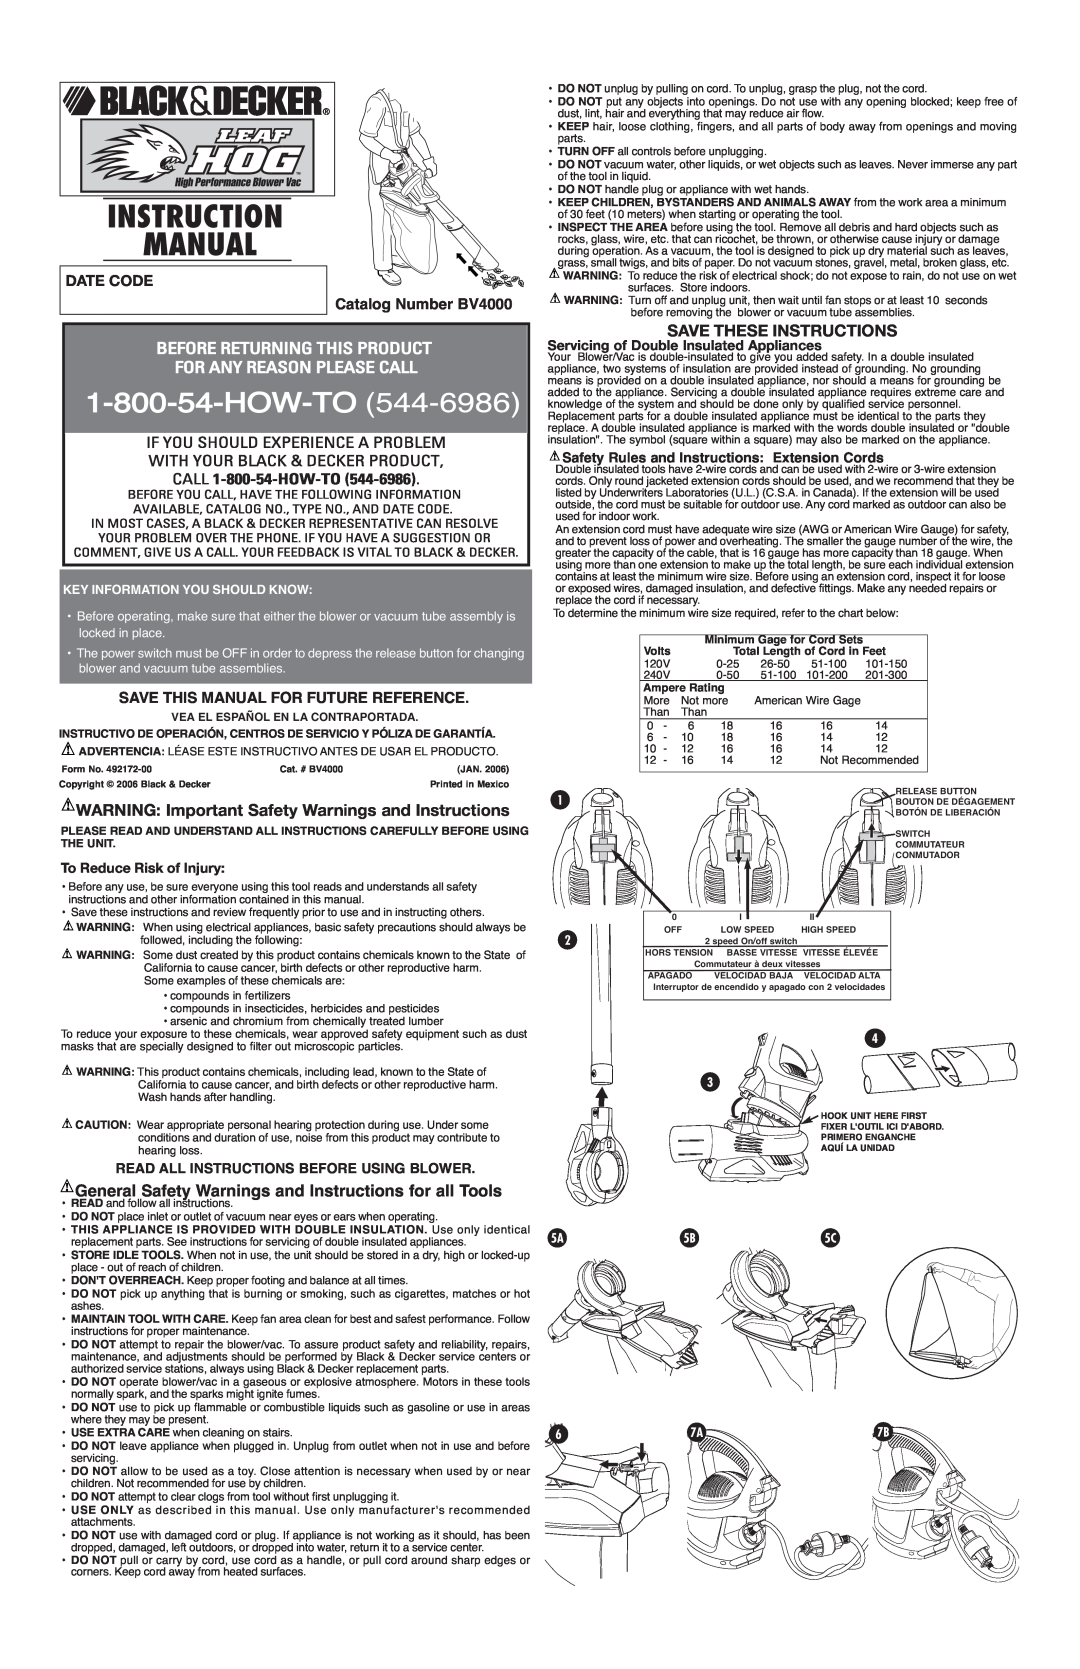 Black & Decker 492172-00 instruction manual WARNING Important Safety Warnings and Instructions, Save These Instructions 